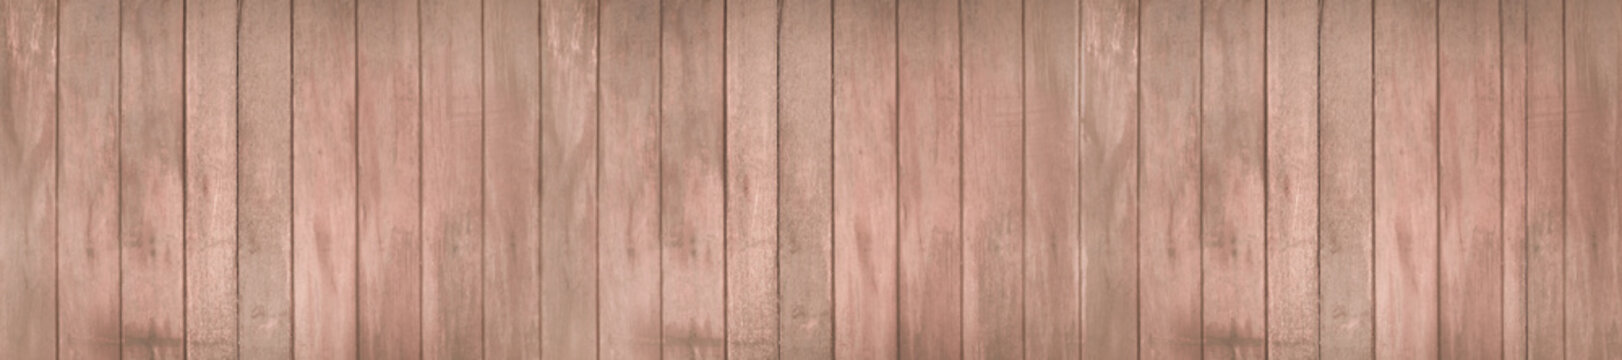 Panorama of old rustic natural grunge brown wood texture free background surface pattern